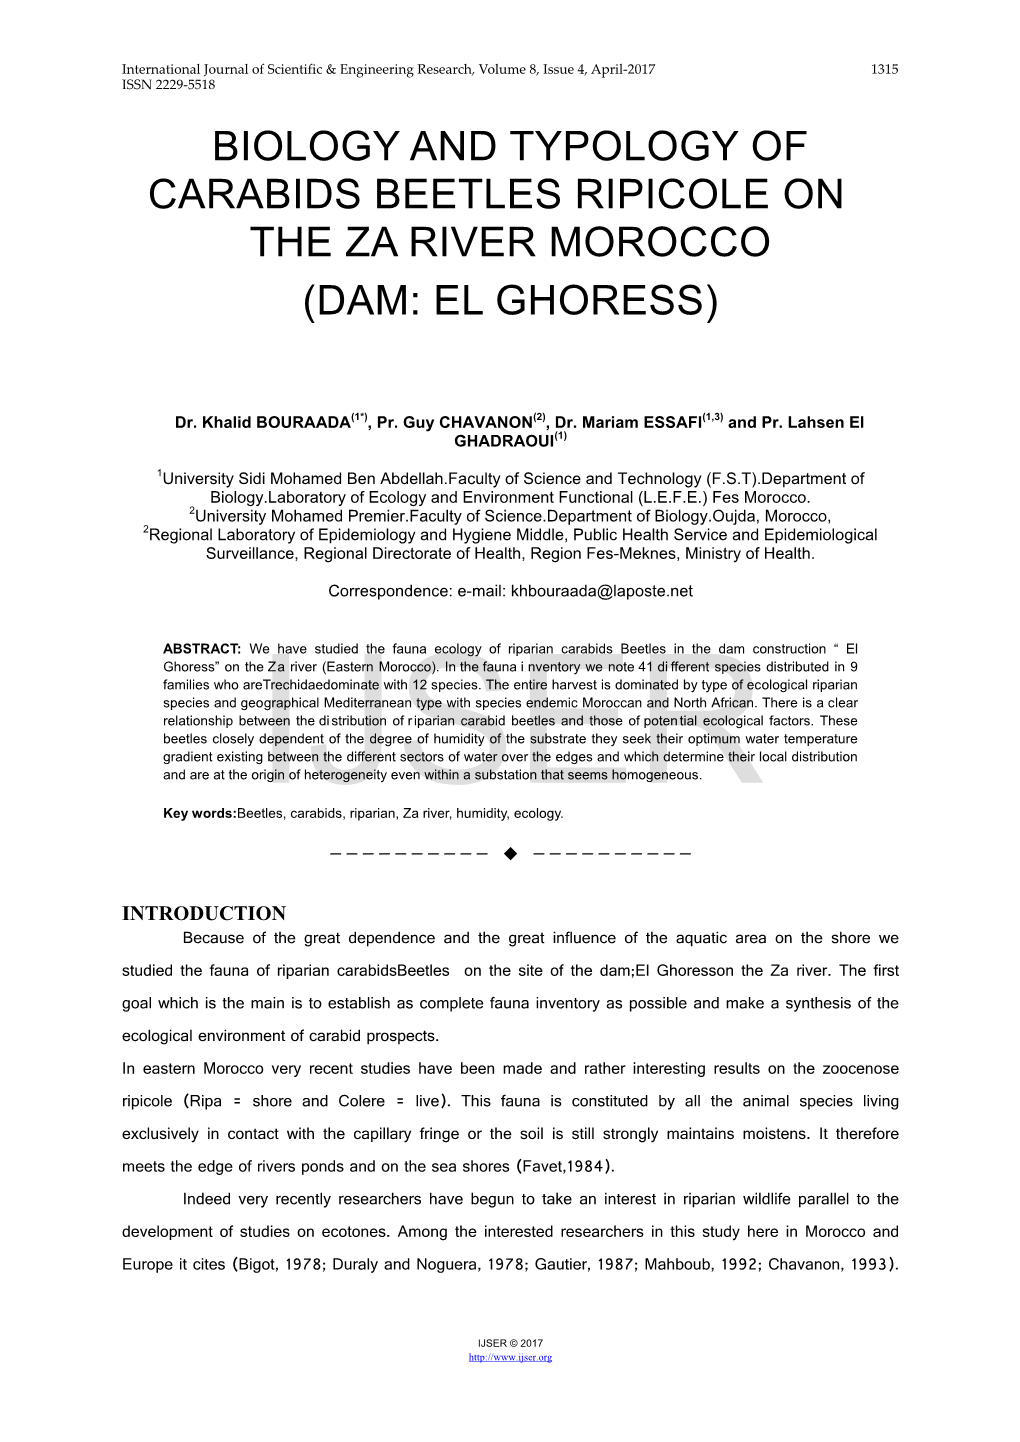 Biology and Typology of Carabids Beetles Ripicole on the Za River Morocco (Dam: El Ghoress)